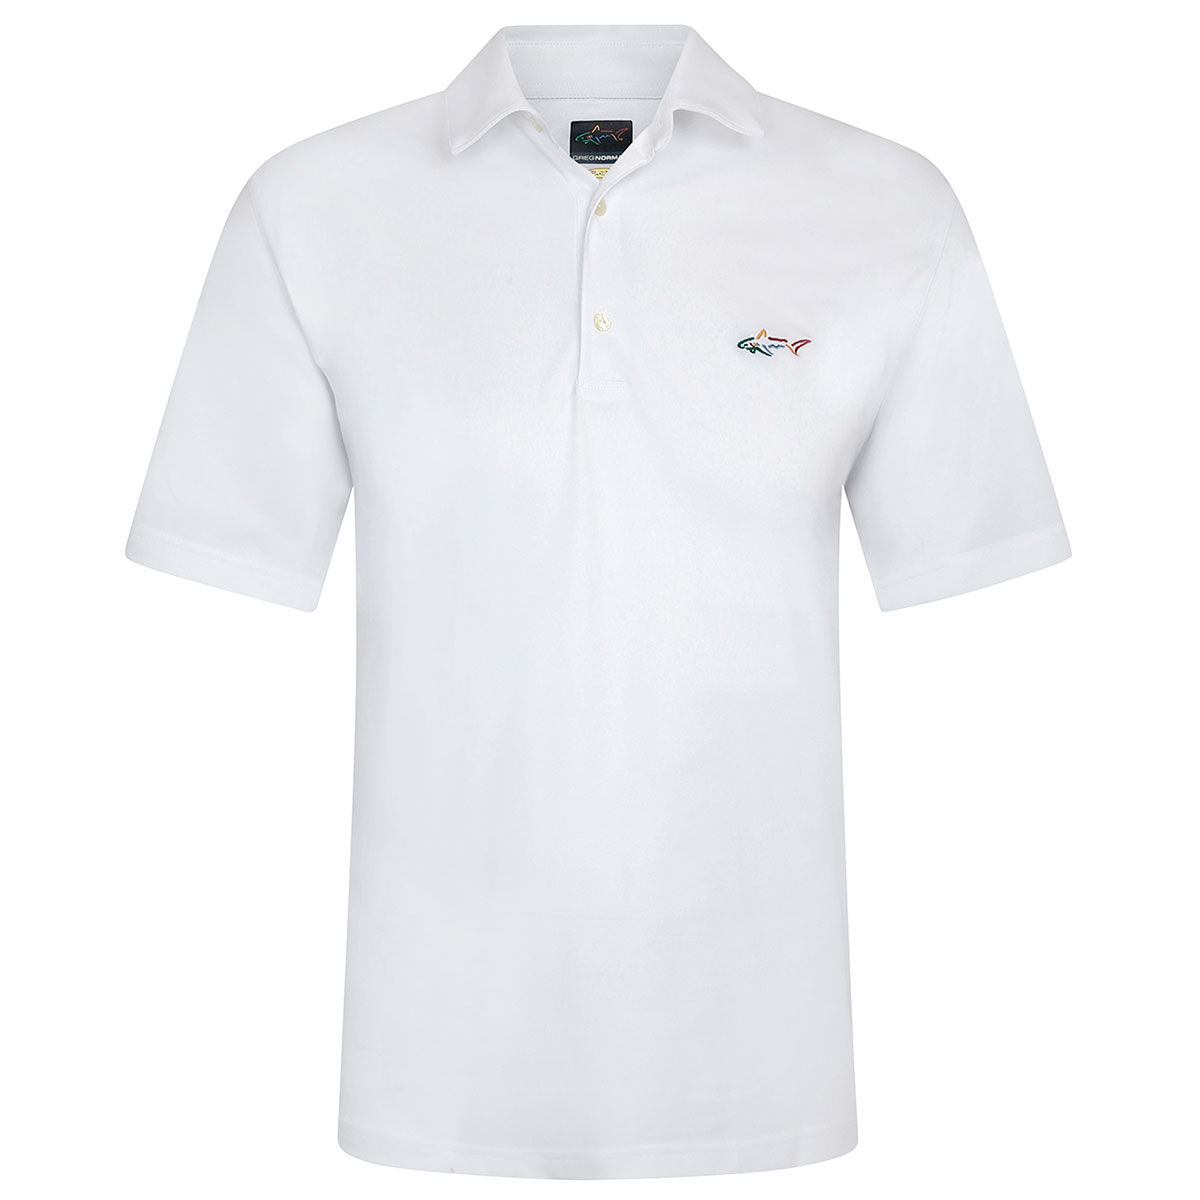 Greg Norman White Embroidered Shark Logo Golf Polo Shirt, Mens | American Golf, Size: Large - Father's Day Gift von Greg Norman